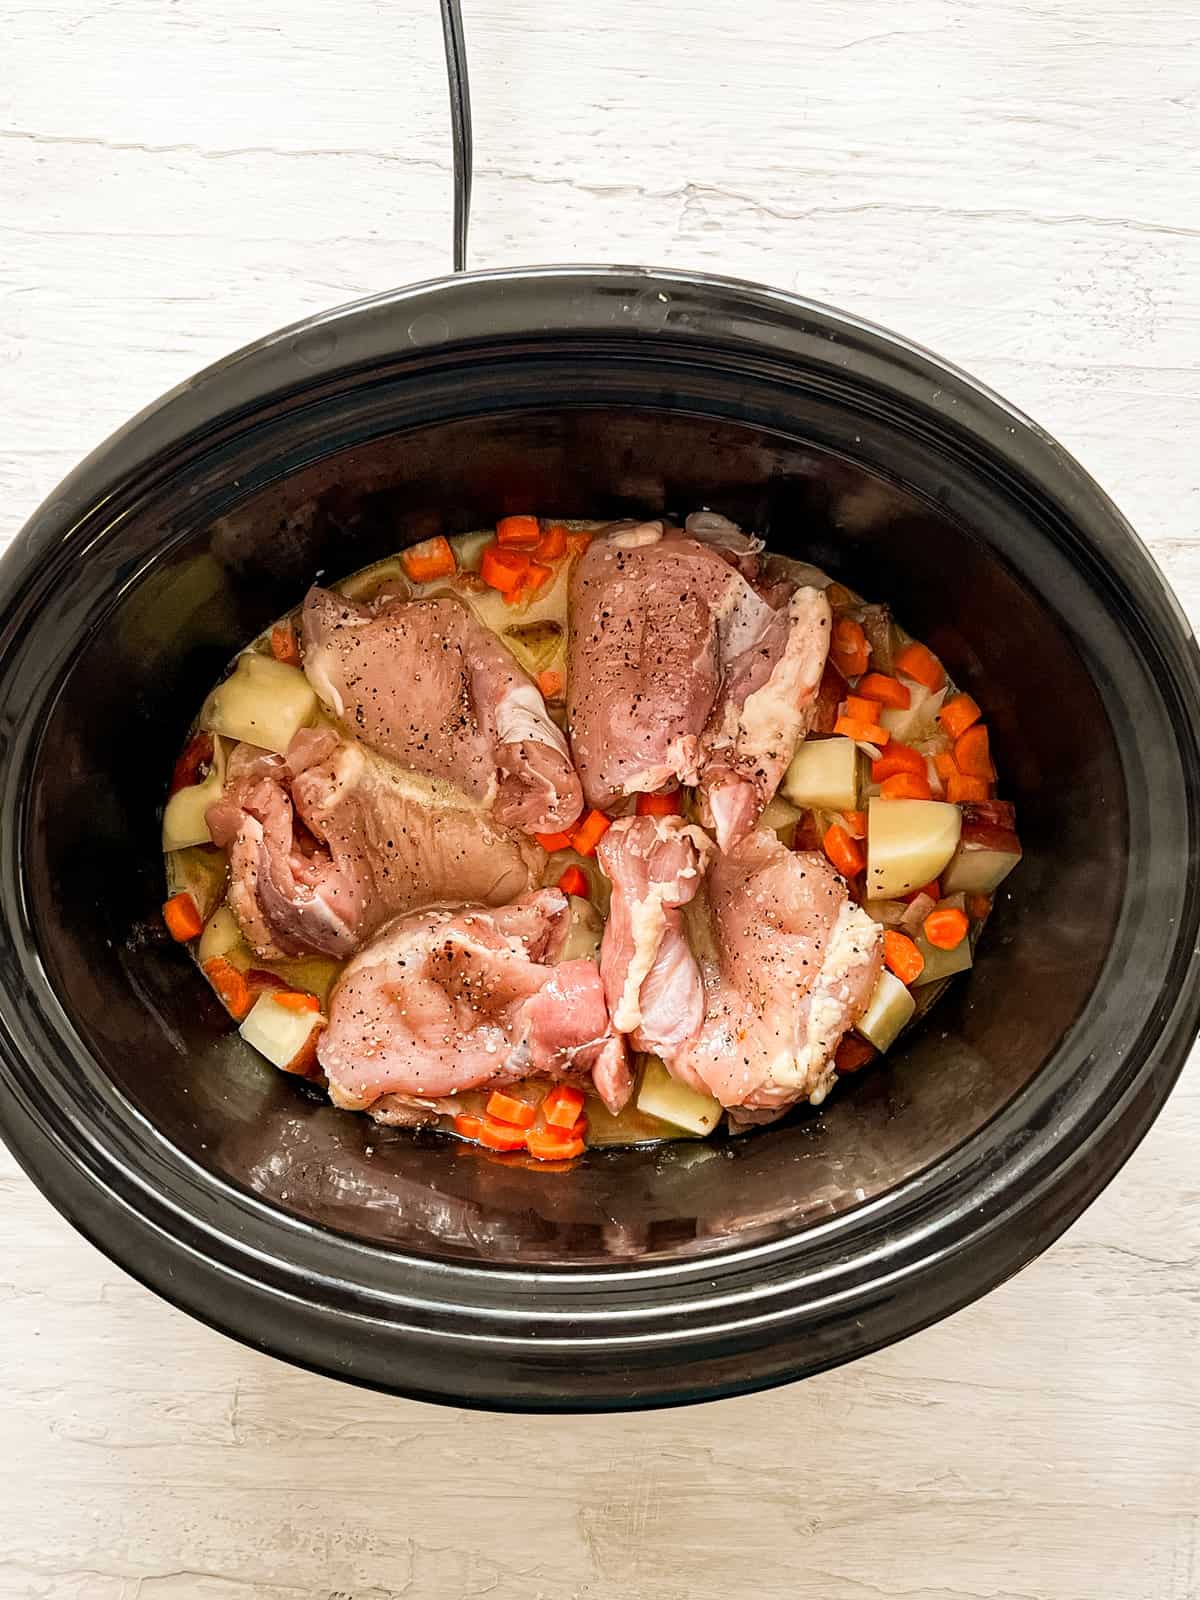 Chicken thighs and sauteed veggies in a slow cooker before cooking.